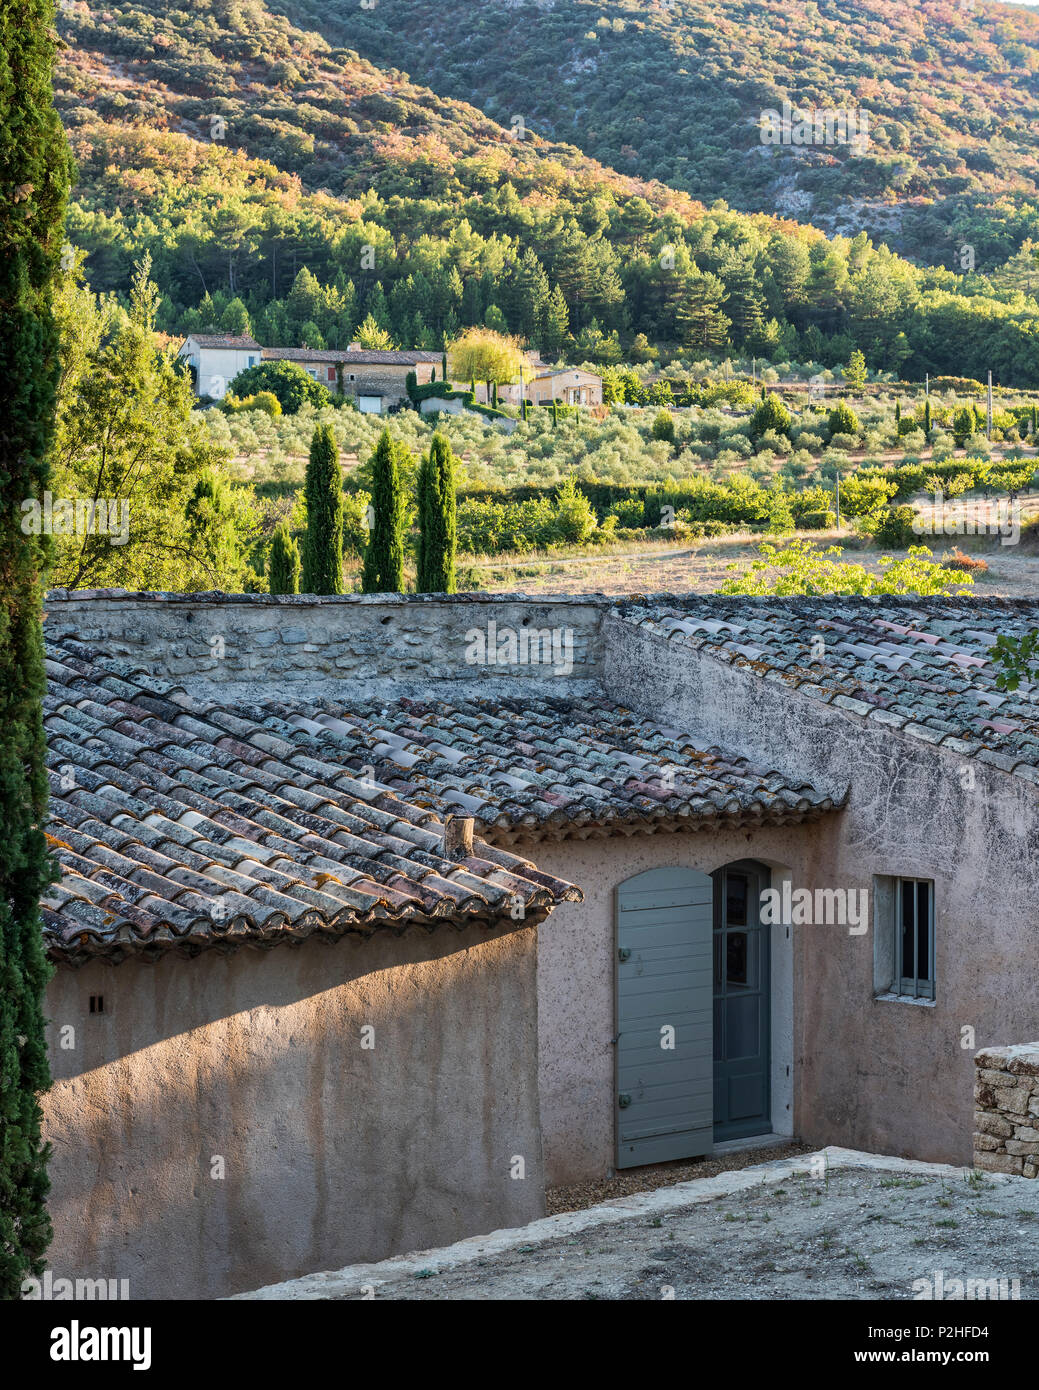 Tiled rooftop of renovated Luberon farmhouse on hillside Stock Photo